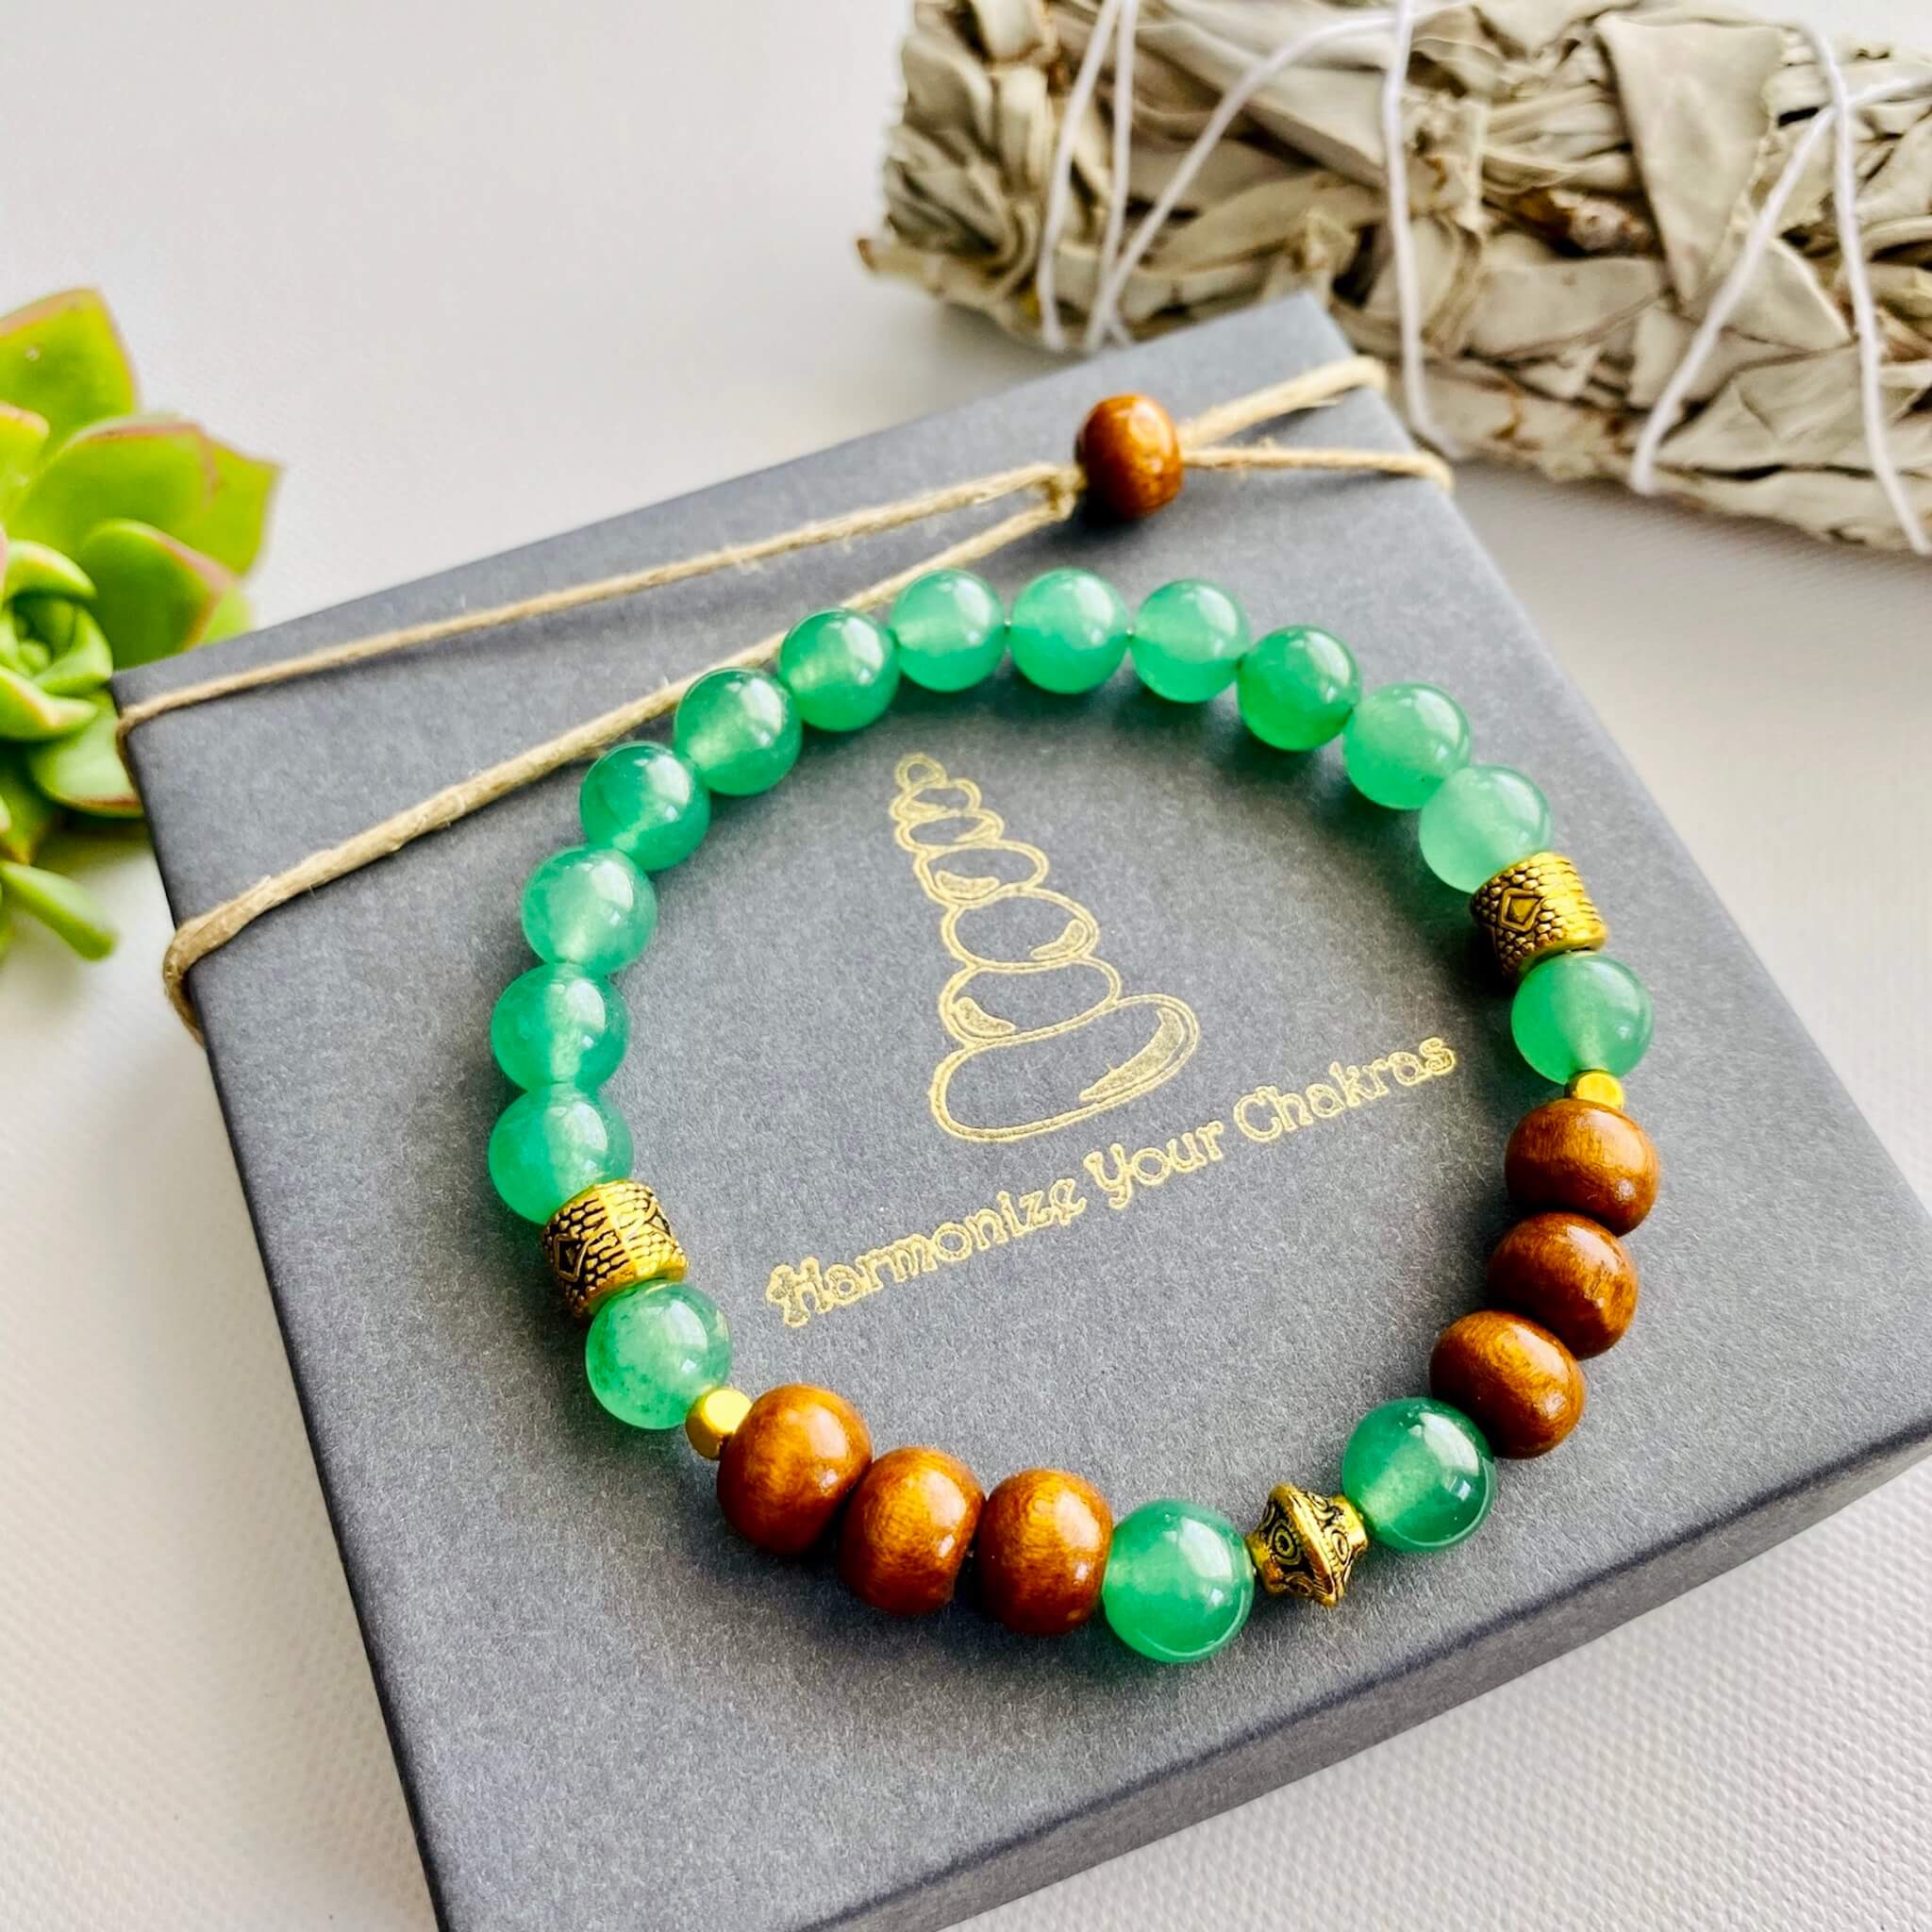 Buy Natural Green Aventurine Bracelet Adjustable Elastic Rubber AAA+  Quality for Men and Women at Amazon.in